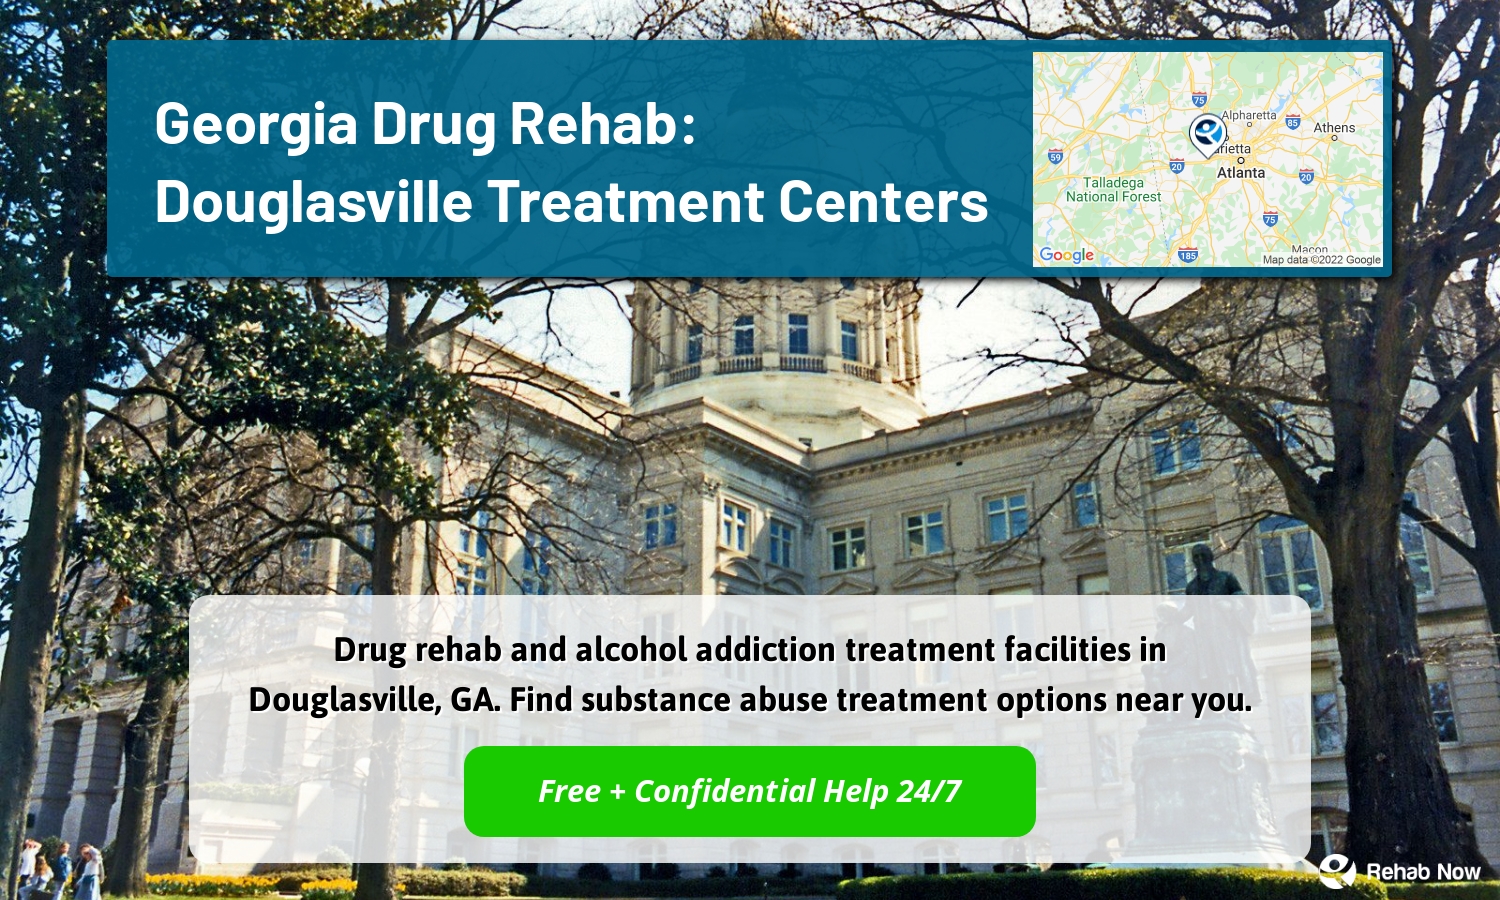 Drug rehab and alcohol addiction treatment facilities in Douglasville, GA. Find substance abuse treatment options near you.